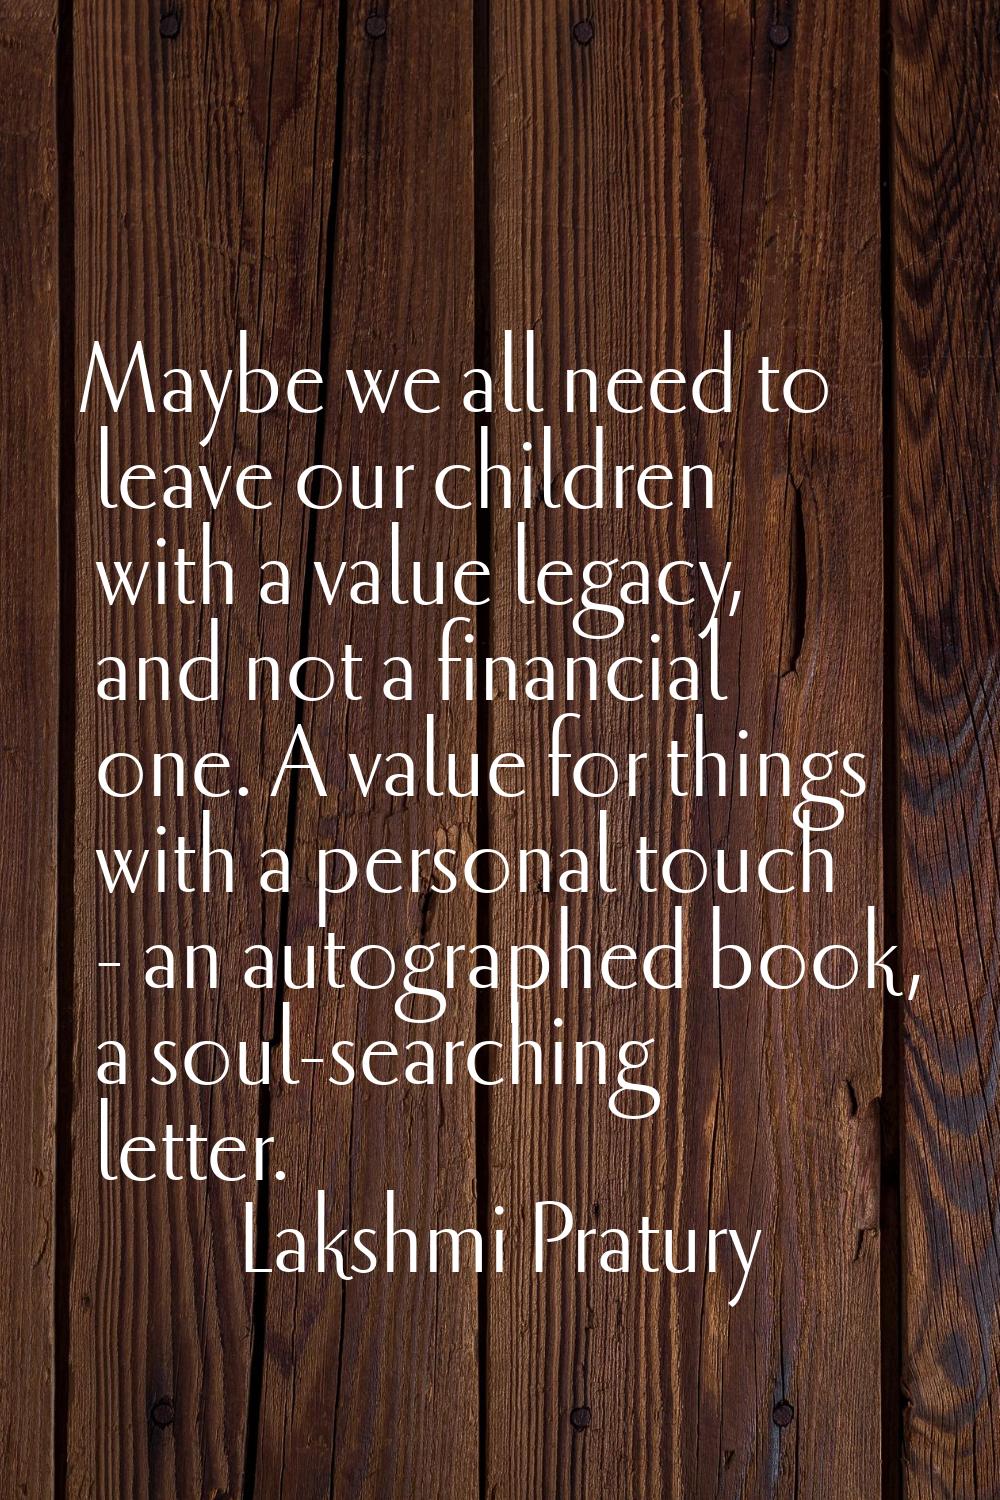 Maybe we all need to leave our children with a value legacy, and not a financial one. A value for t